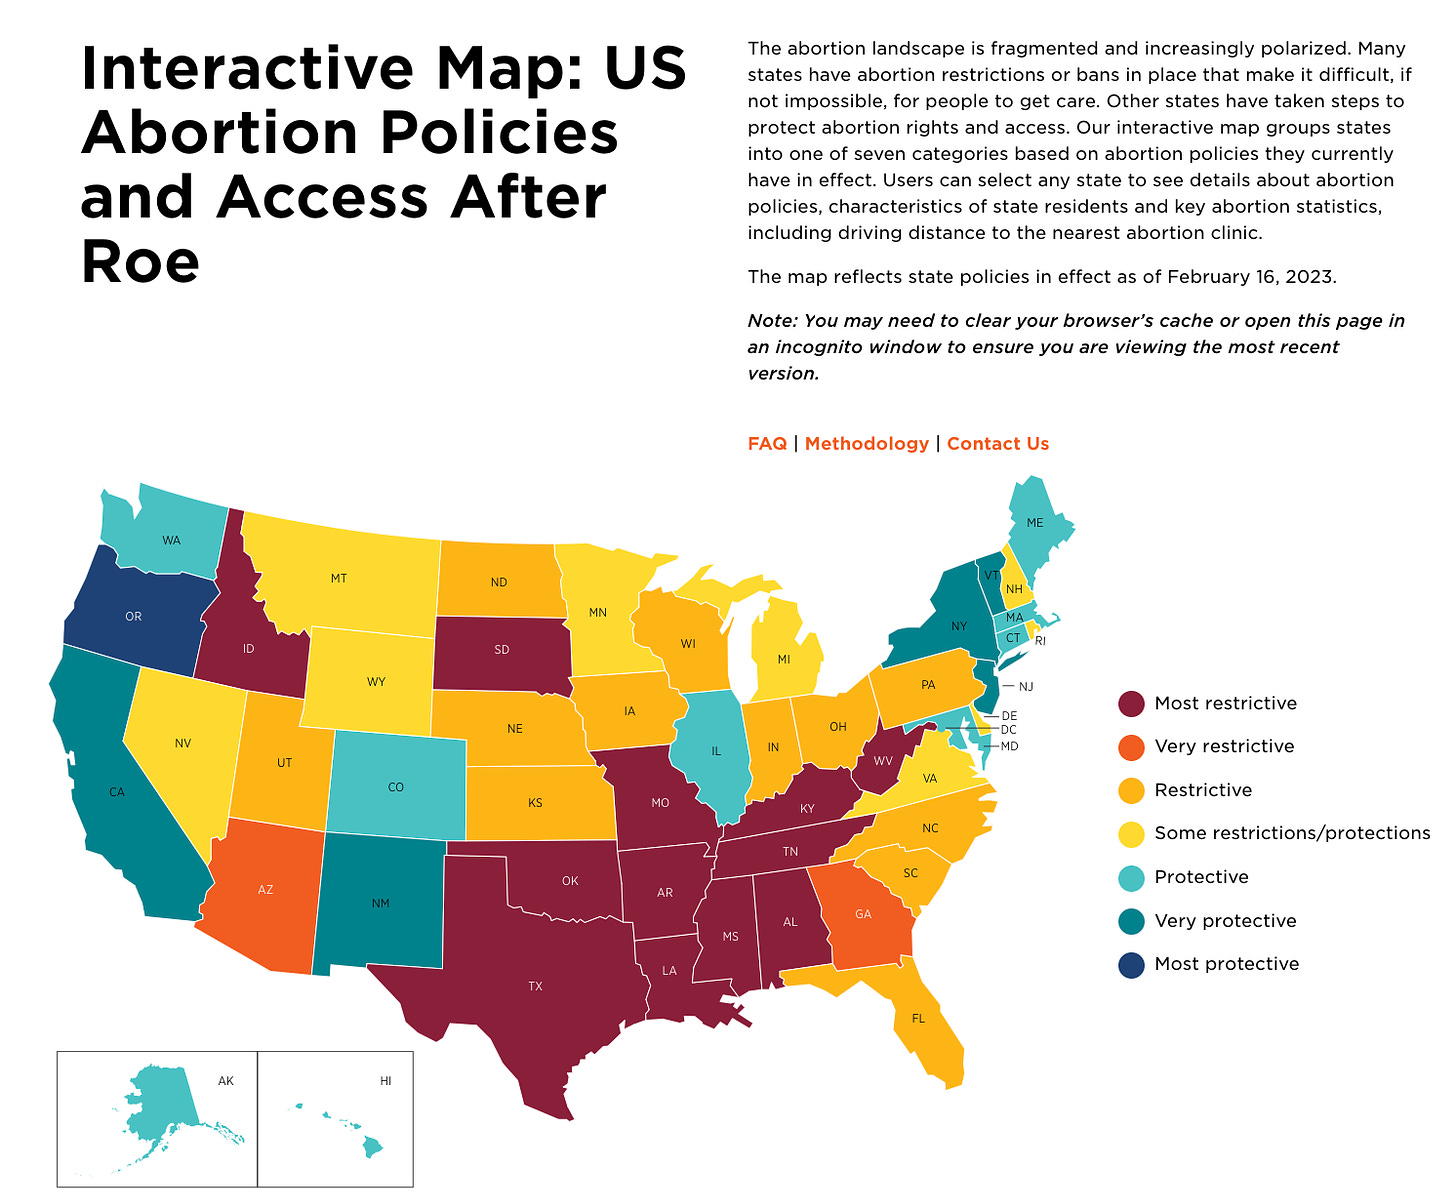 Interactive map showing US abortion policies and access after Roe